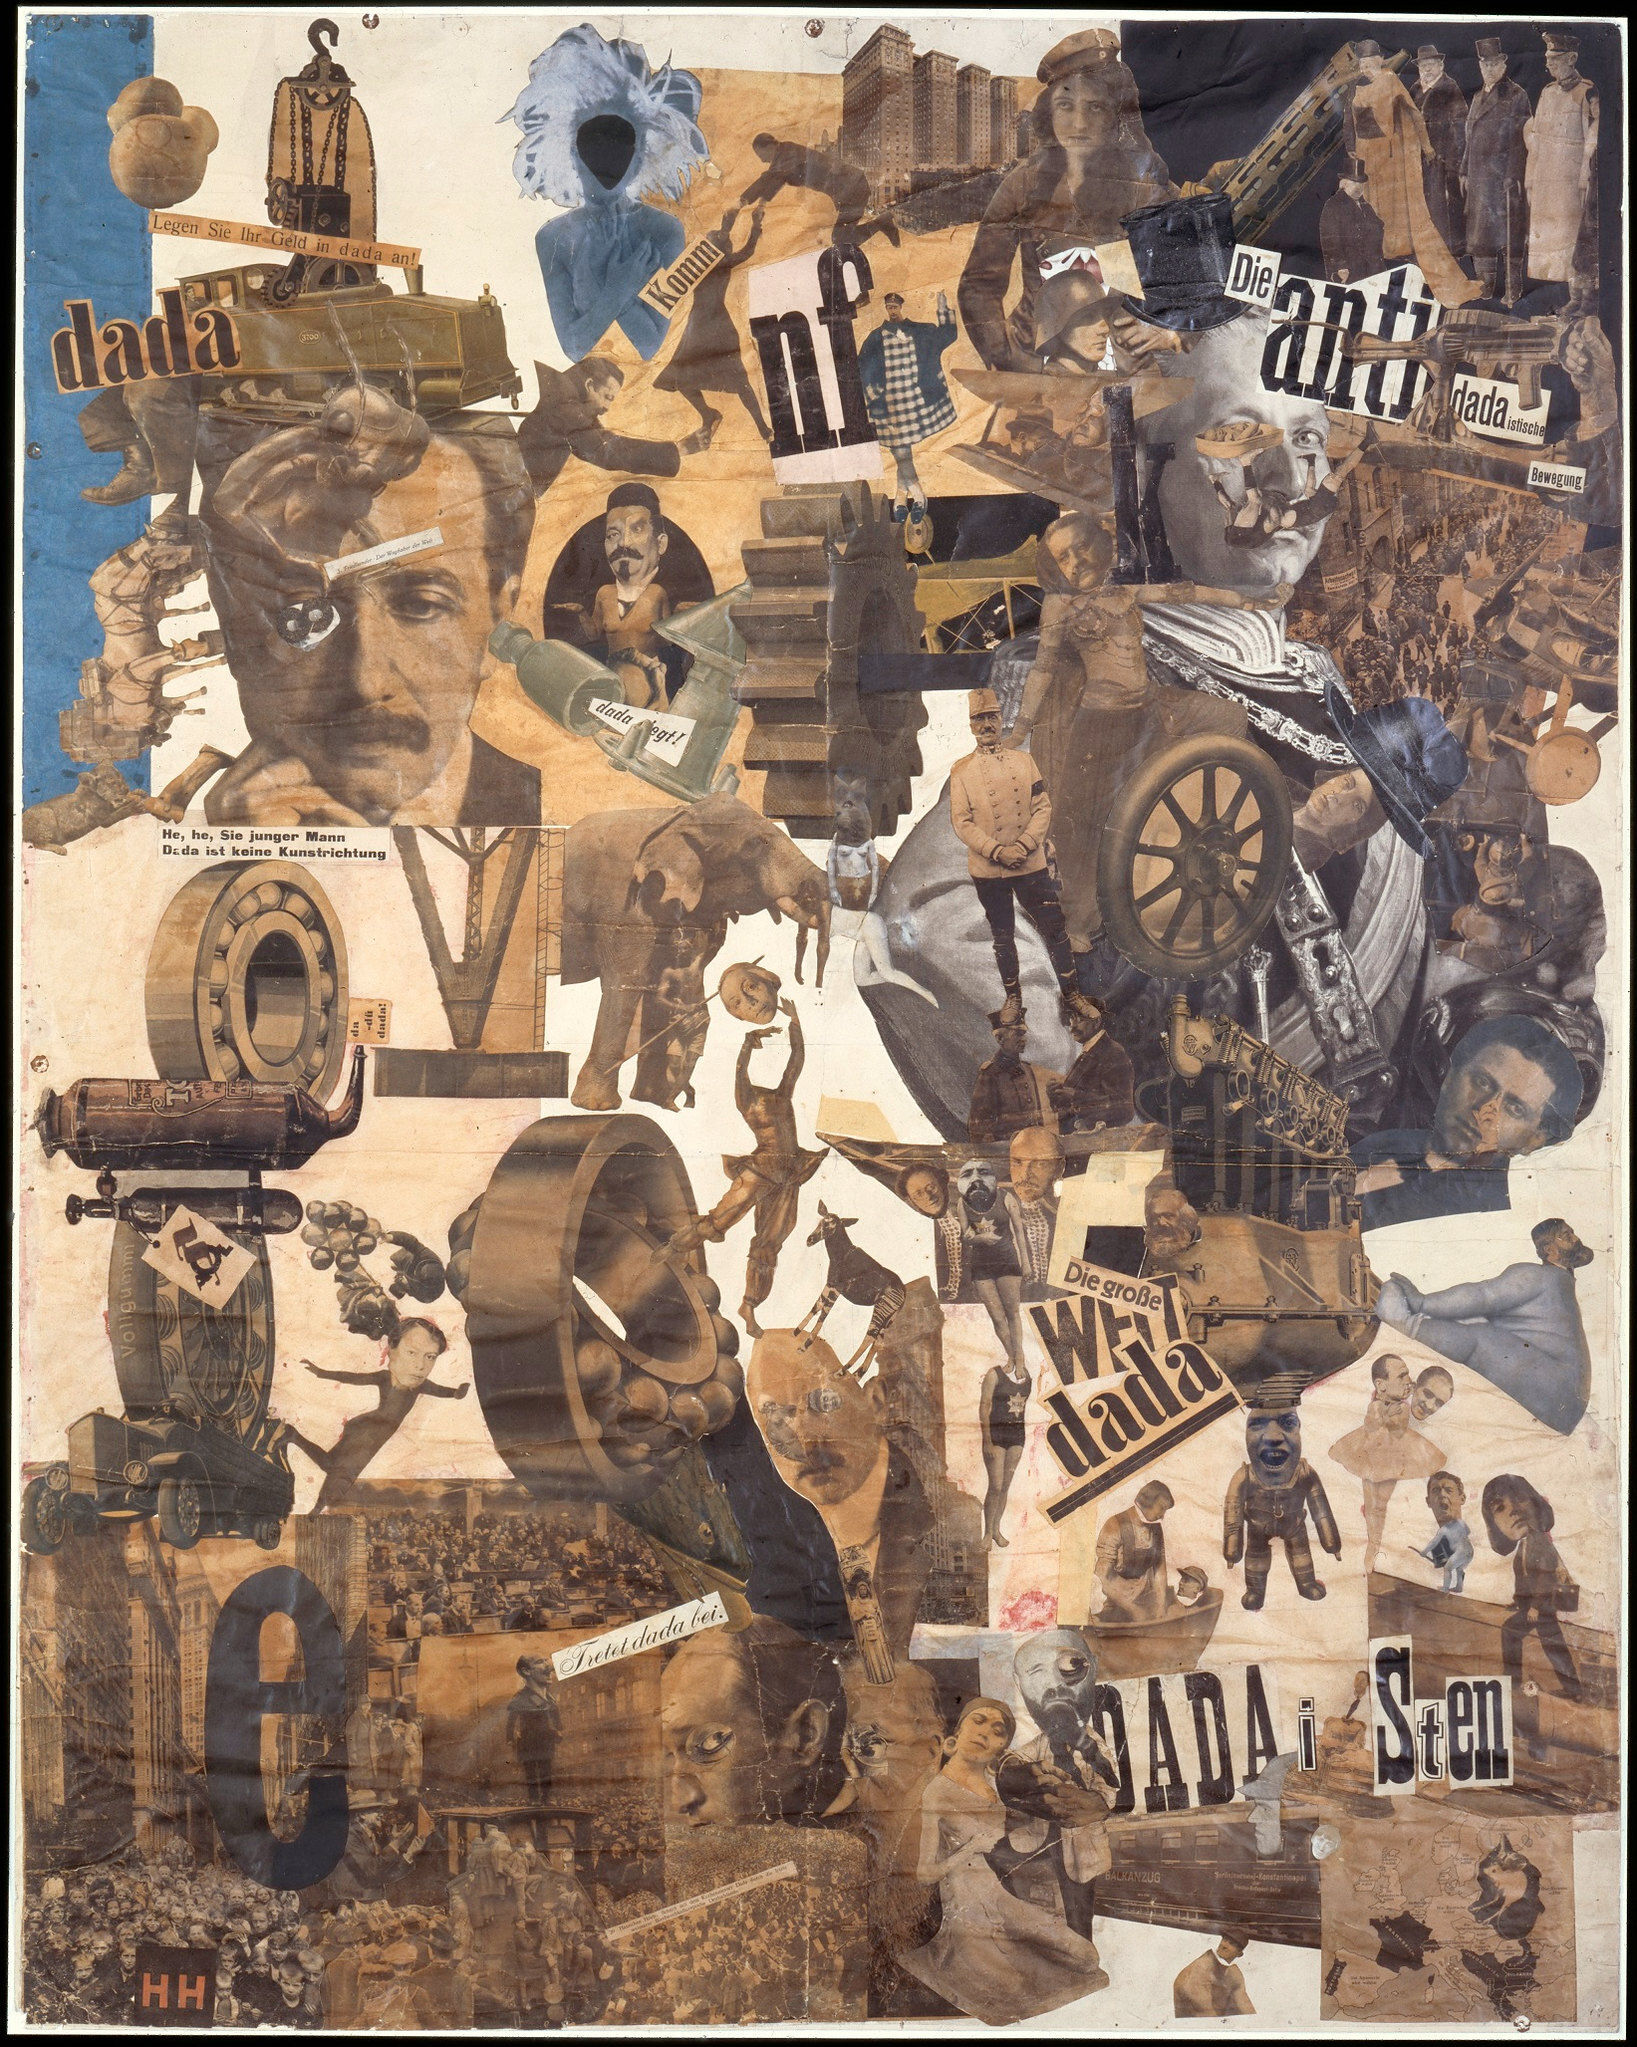 Hannah Höch, Cut with the Kitchen Knife through the Last Weimar Beer-Belly Cultural Epoch in Germany, photomontage and collage with watercolor, 1919-1920, 114 x 90 cm, Nationalgalerie, Staatliche Museen, Berlin